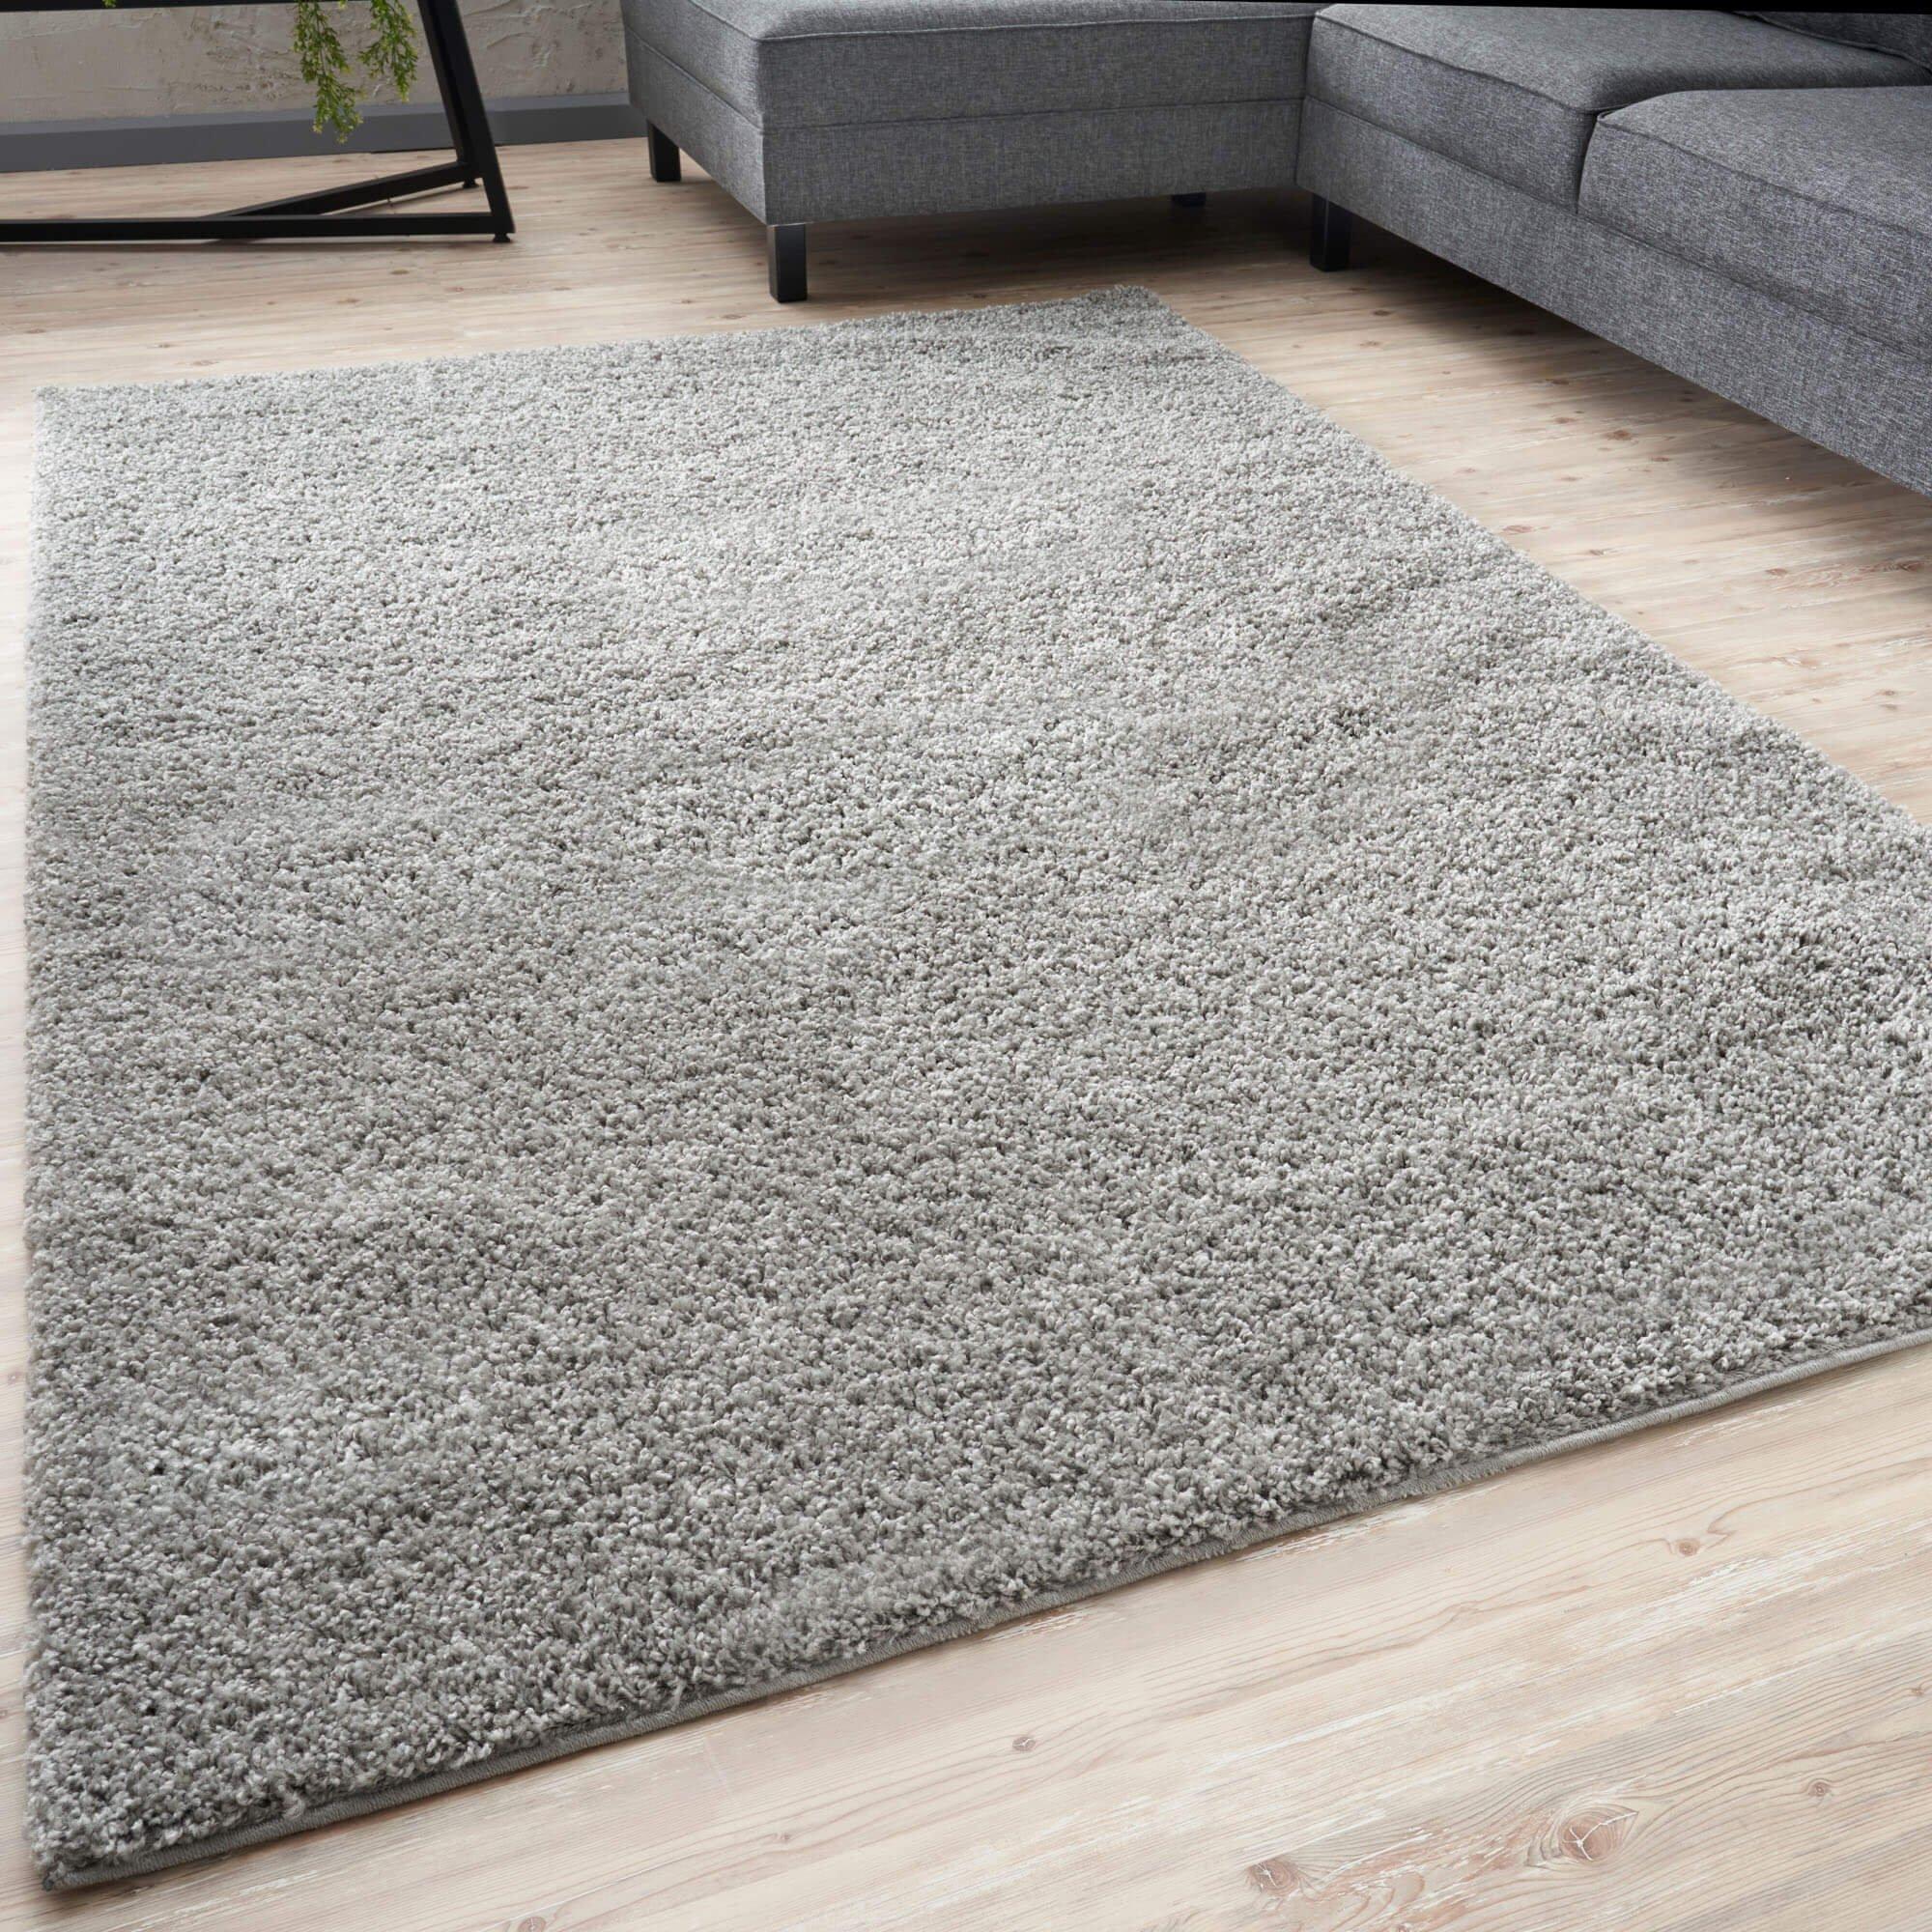 Myshaggy Collection Rugs Solid Design in Grey